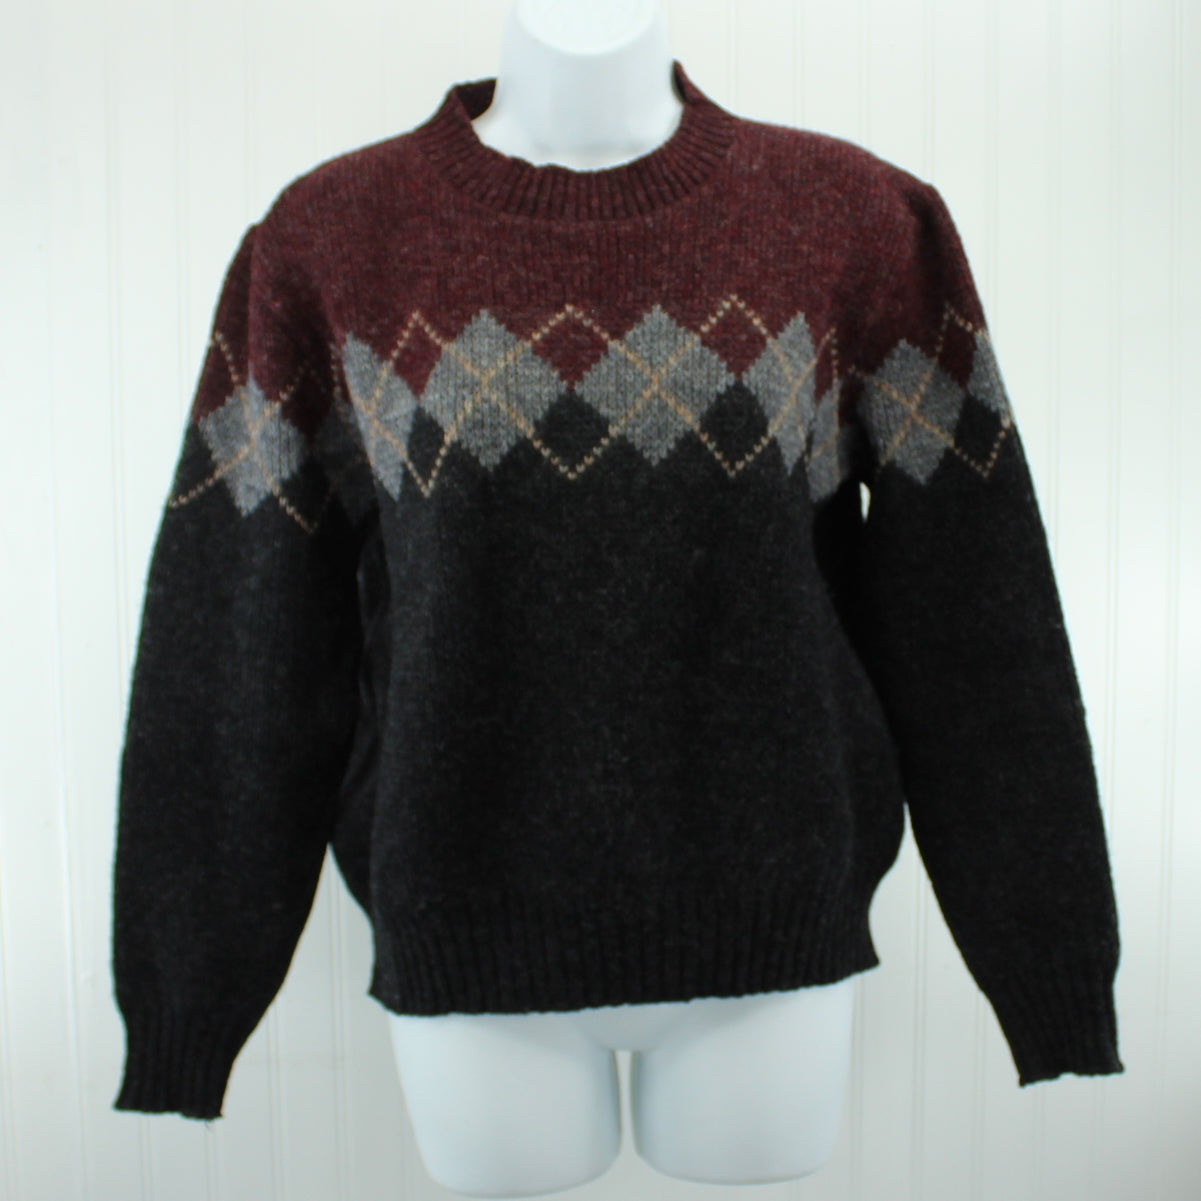 Pendleton Pullover Sweater Jumper Wool Maroon Grey Argyle Pattern - Size 36 very handsome sweater